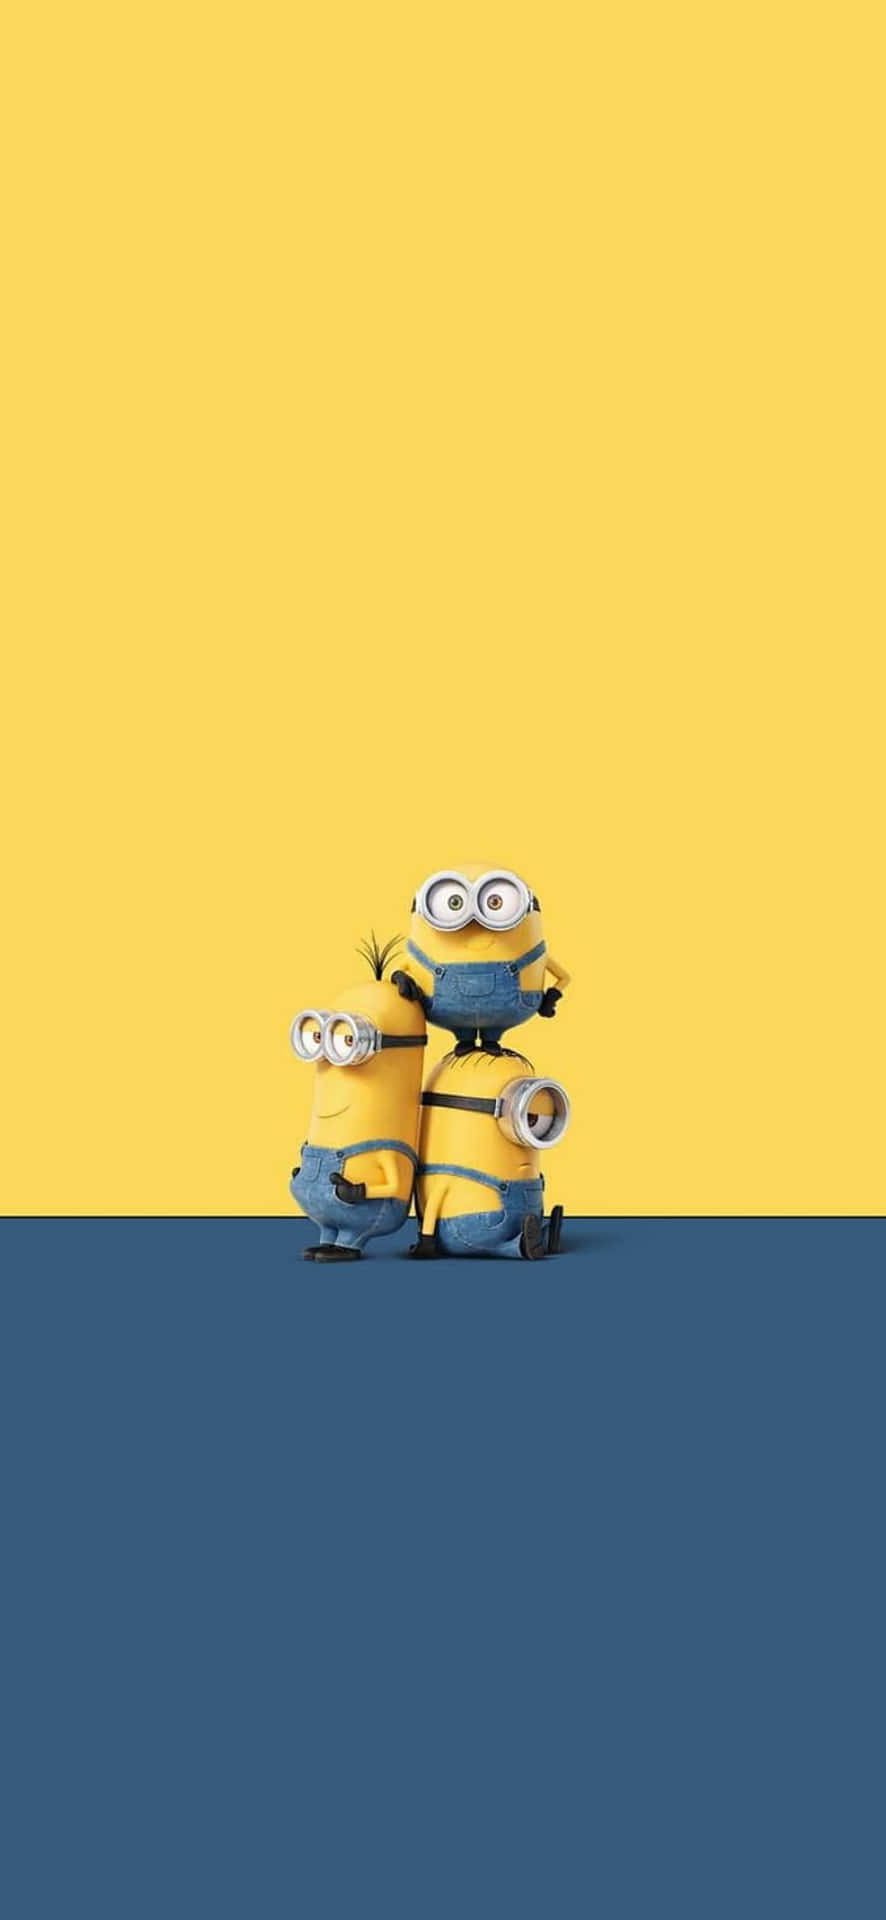 Yellow And Blue Despicable Me Minion Iphone Wallpaper